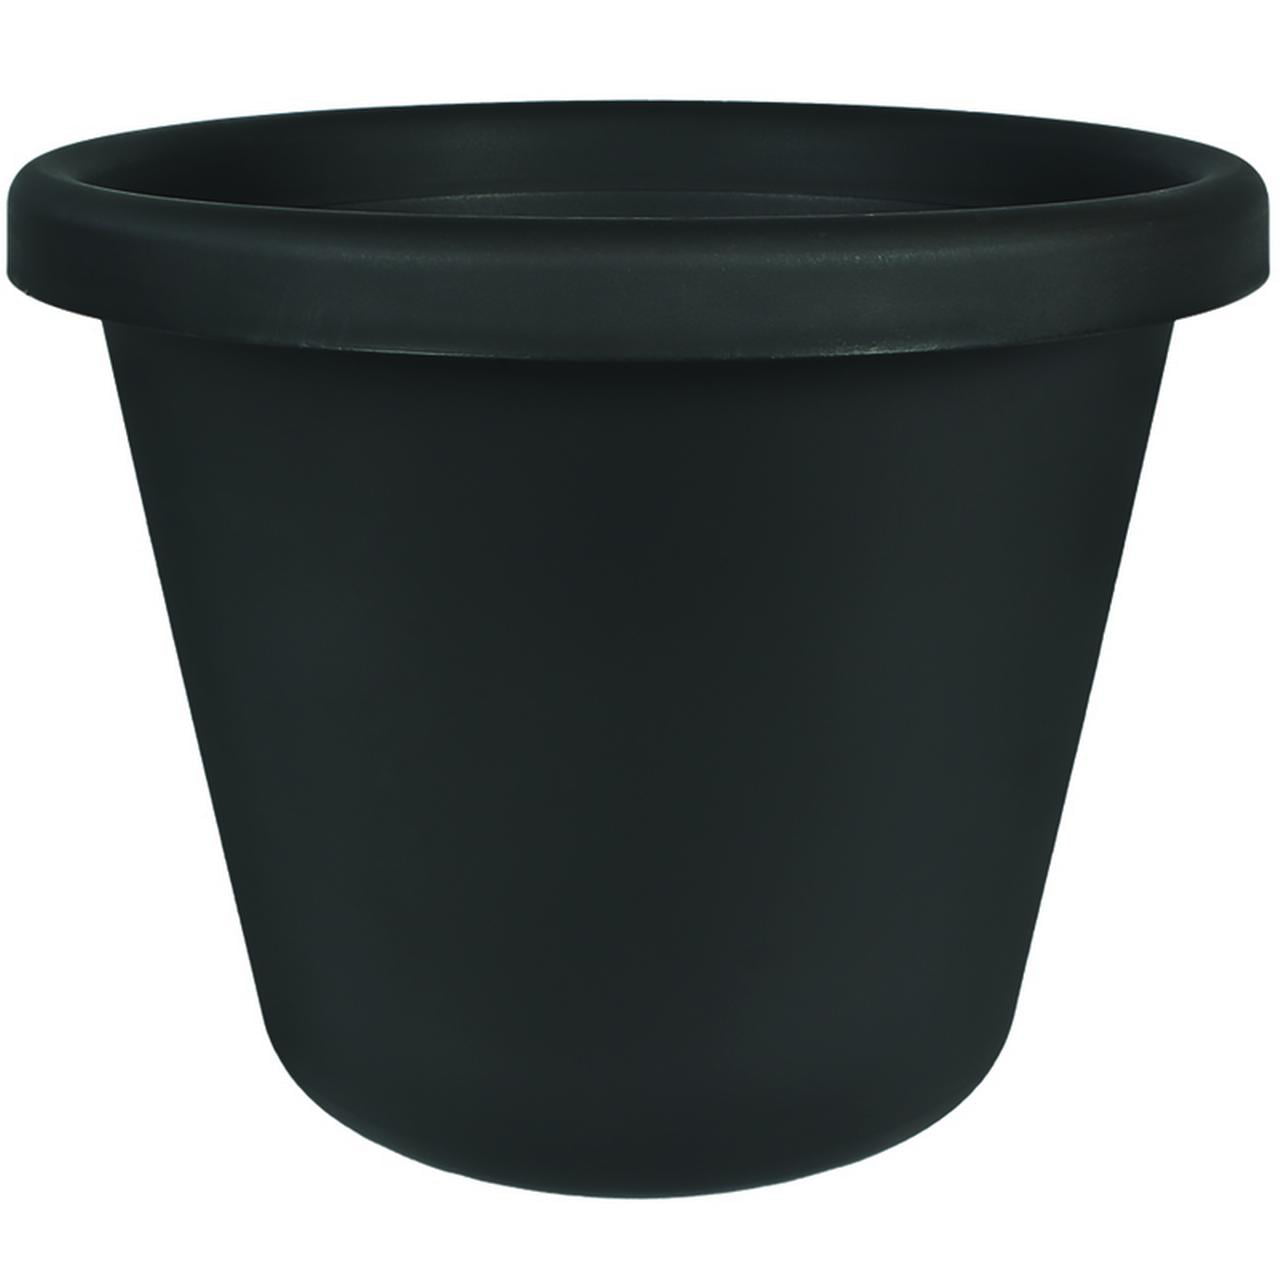 The HC Companies 24 Inch Indoor and Outdoor Classic Durable Plastic Flower Pot Container Garden Planter with Molded Rim and Drainage Holes Chocolate 